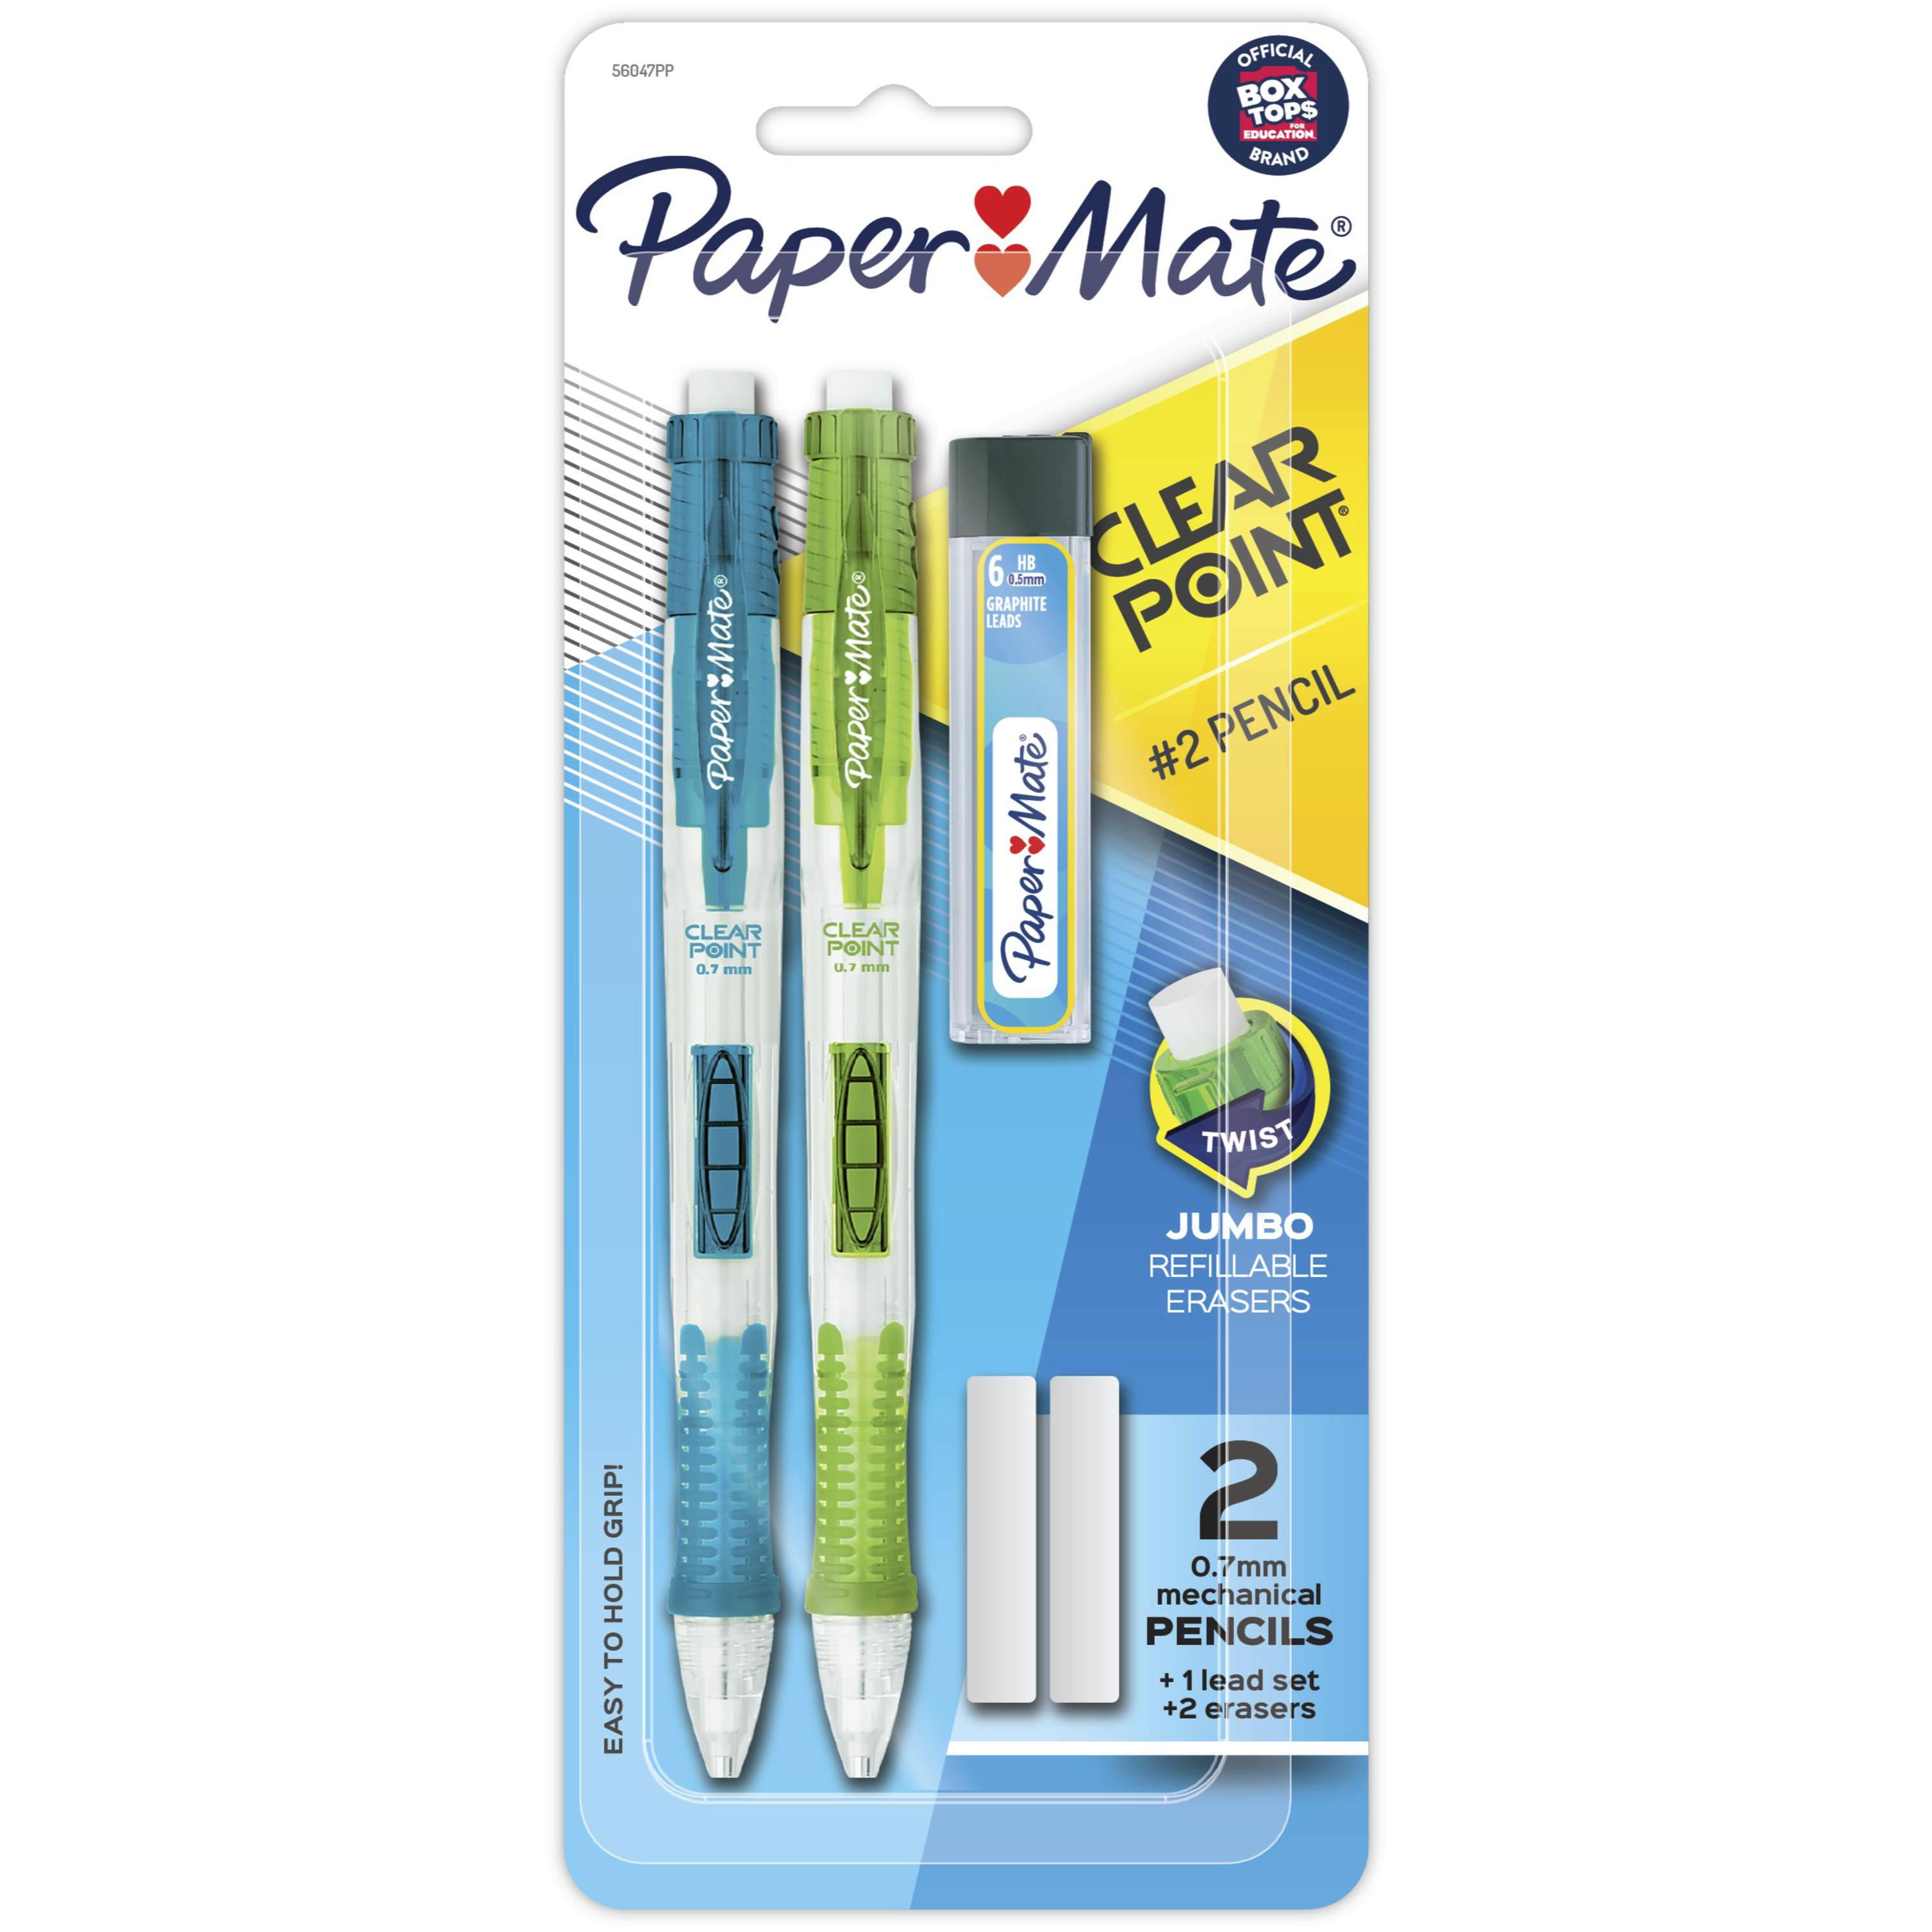 Lot of 4 Pkgs Papermate Mechanical Pencils 7 Pk 0.7mm HB#2 Lead Free Shipping!